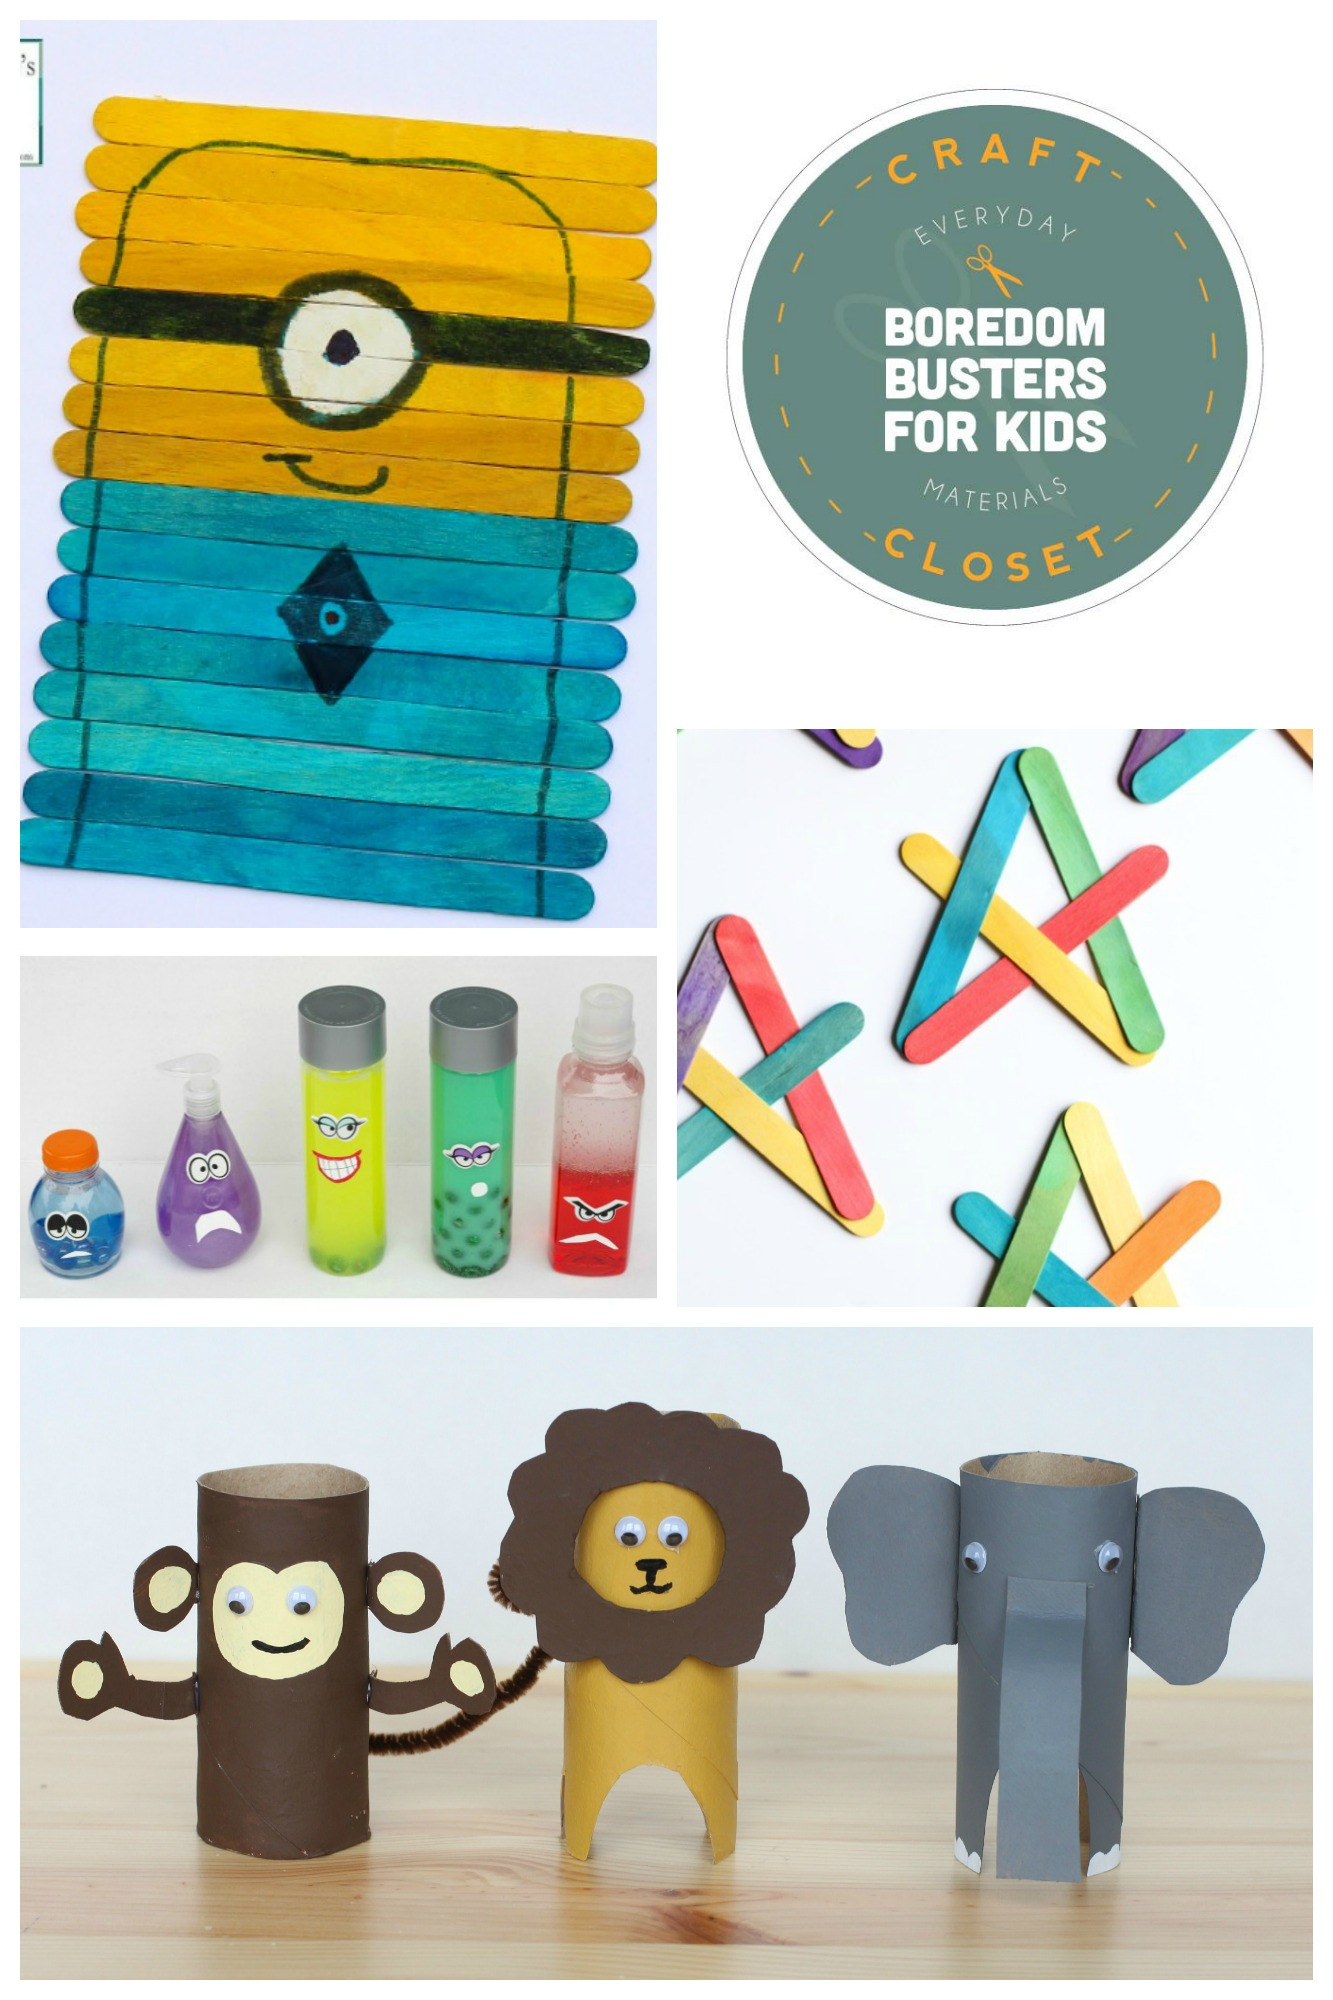 Home Crafts For Toddlers
 25 Crafts and Activities for Kids Using Everyday